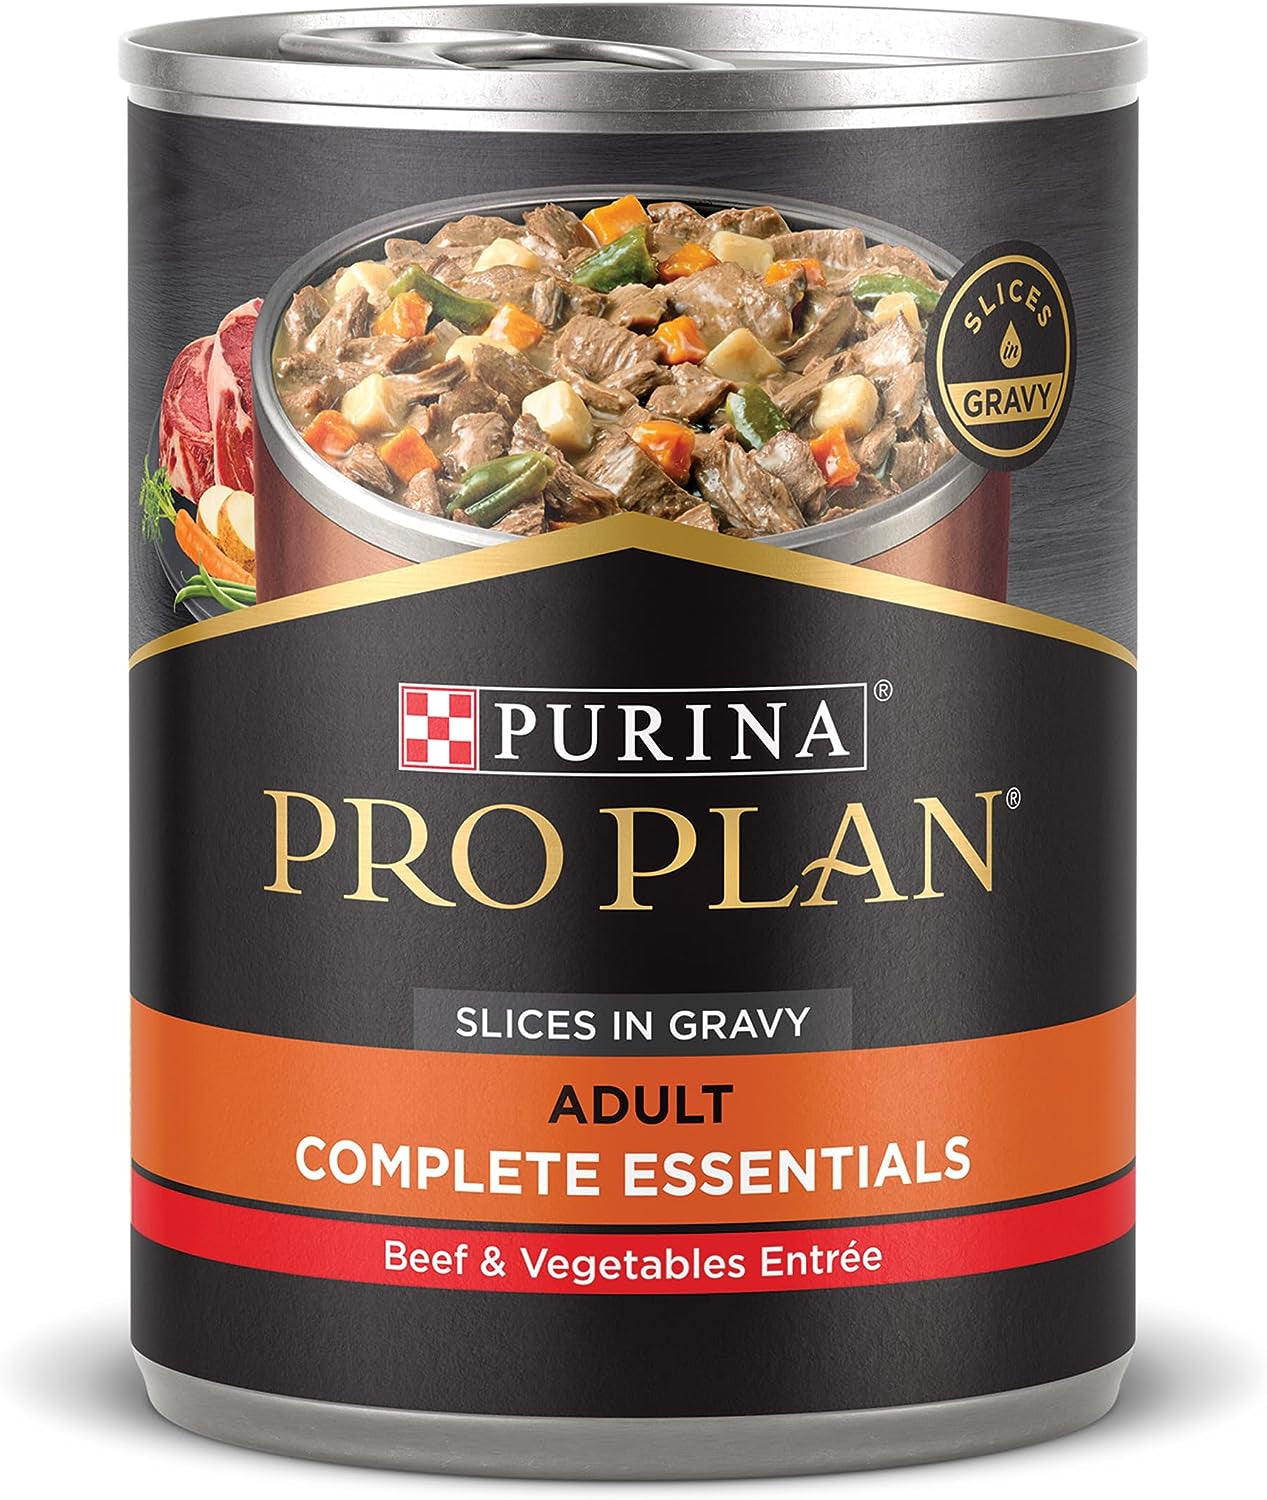 High Protein Dog Food Gravy, Slices in Gravy Beef and Vegetables Entree - (Pack of 12) 13 Oz. Cans